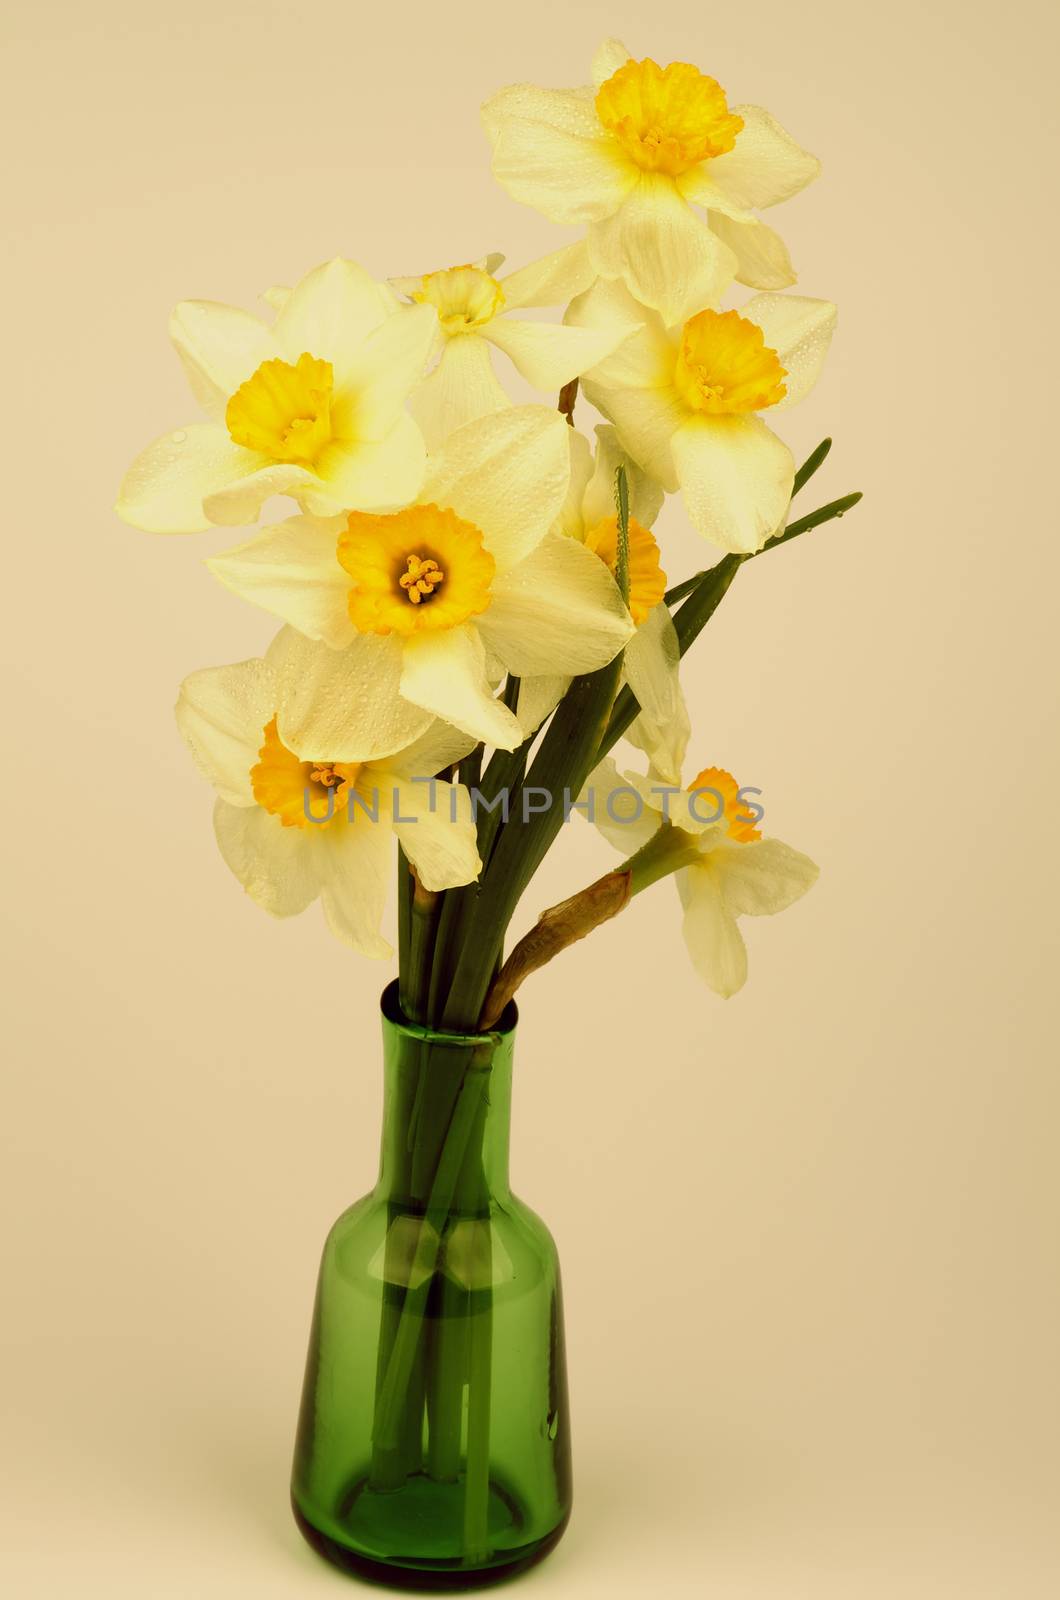 Bunch of Fragile Spring Yellow and White Daffodils in Green Vase closeup. Retro Styled